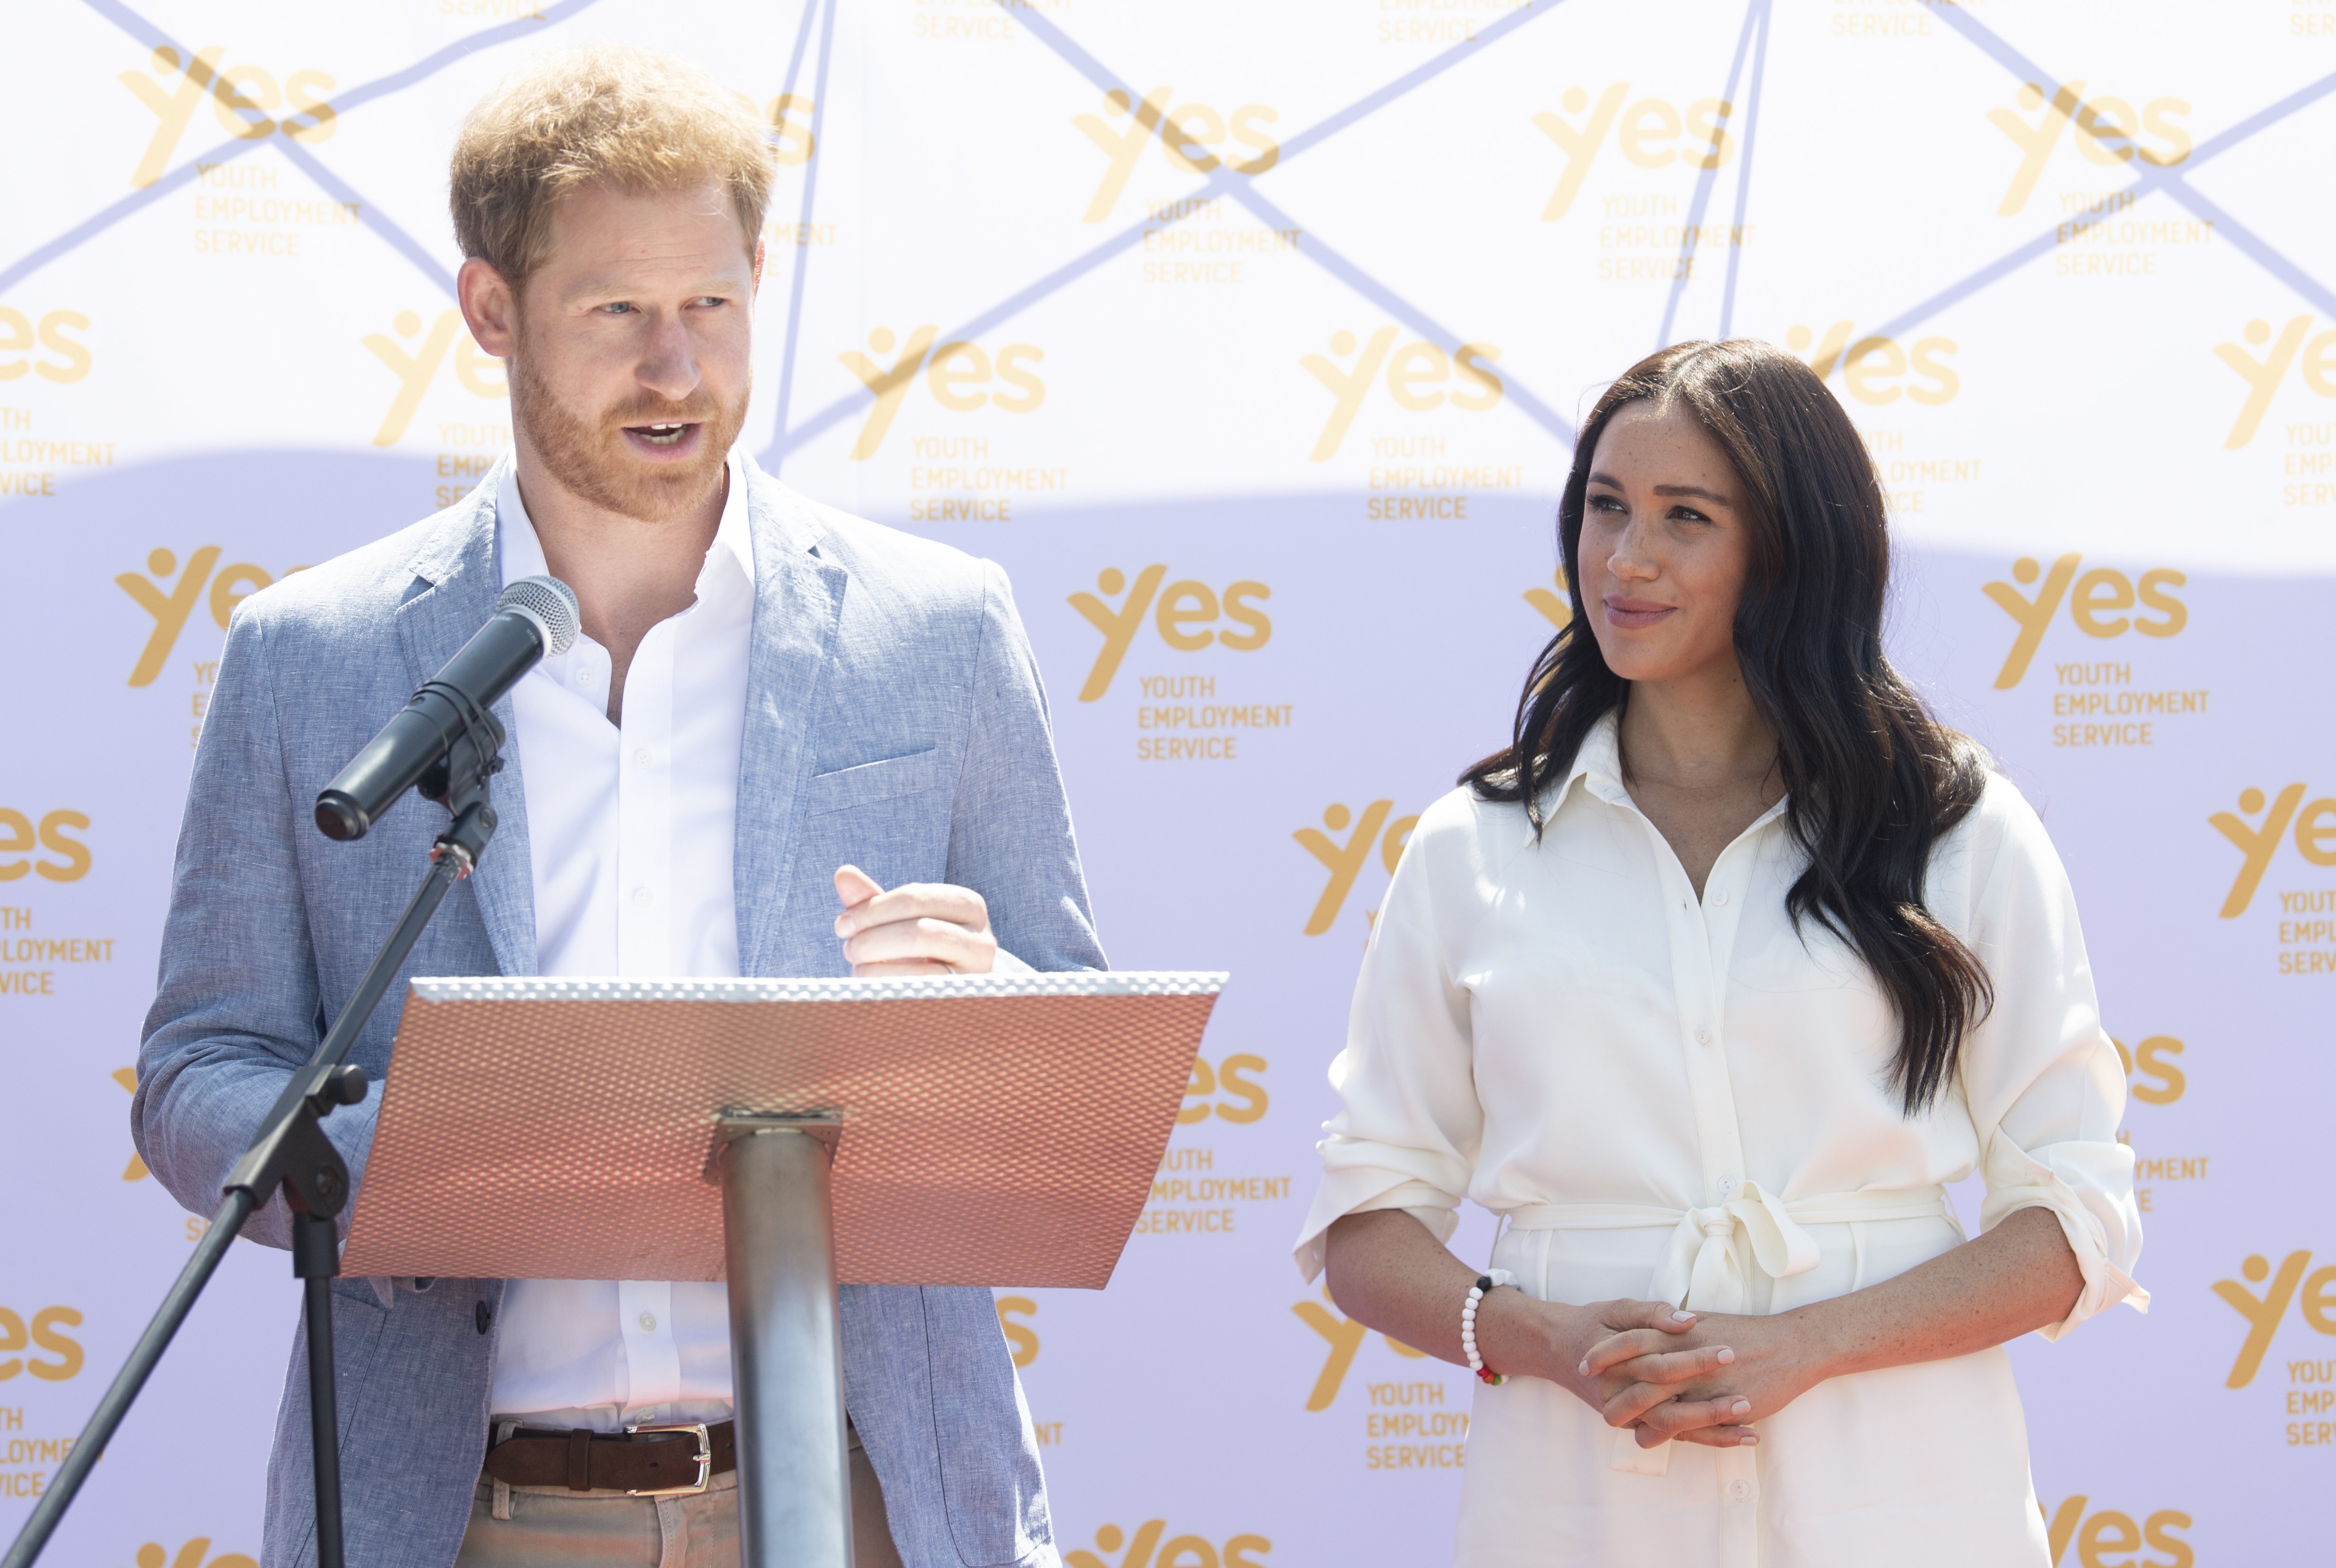 Prince Harry and Meghan visit Tembisa township to learn about Youth Employment Services (YES) on October 2, 2019 in Johannesburg, South Africa. | Source: Getty Images